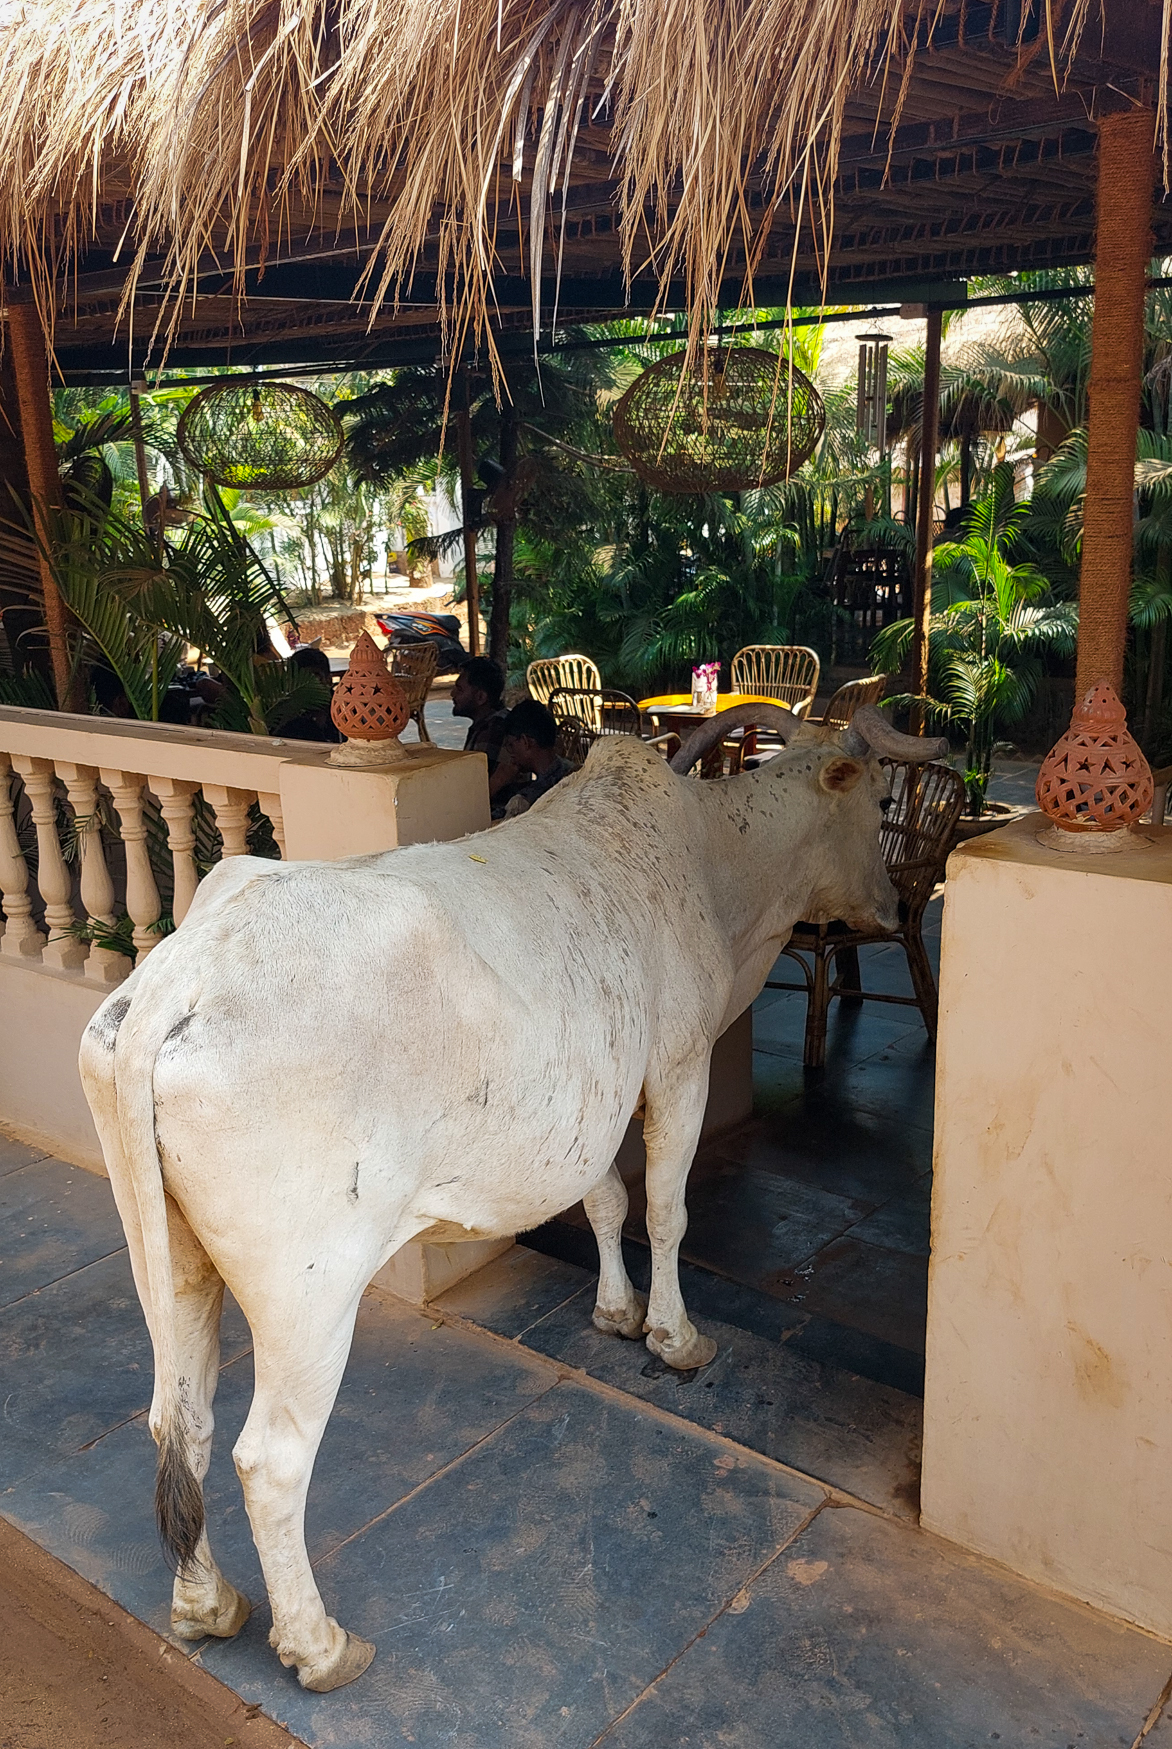 <span  class="uc_style_uc_tiles_grid_image_elementor_uc_items_attribute_title" style="color:#ffffff;">Cows can do what they want in Hindu culture</span>